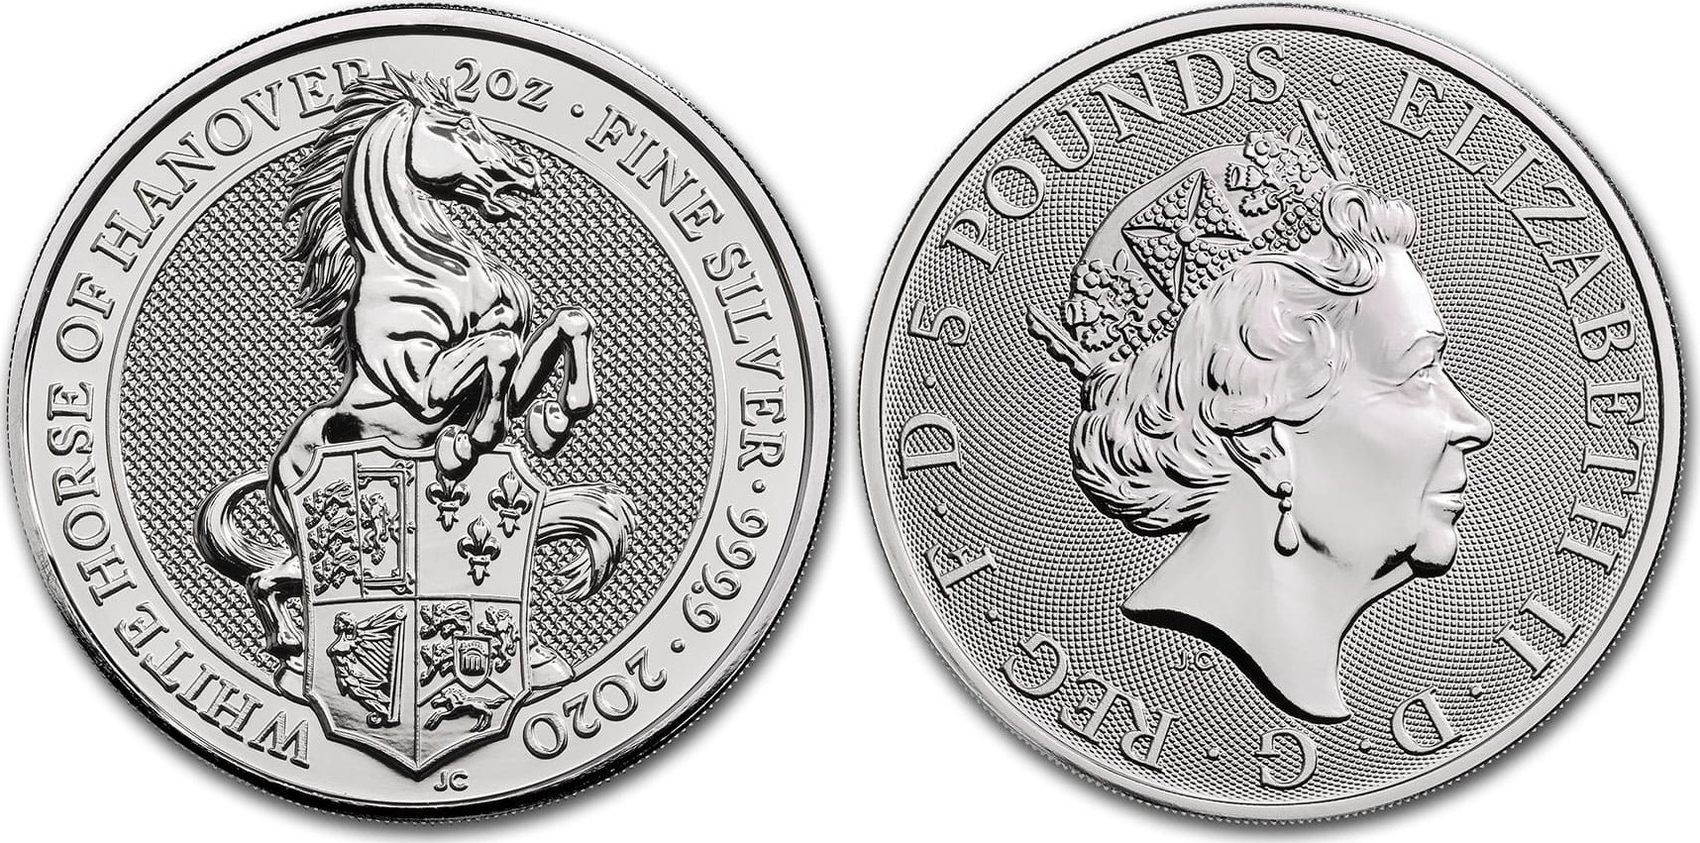 2020 Great Britain 2 oz Silver Queen's Beasts White Horse of Hanover Coin .9999 